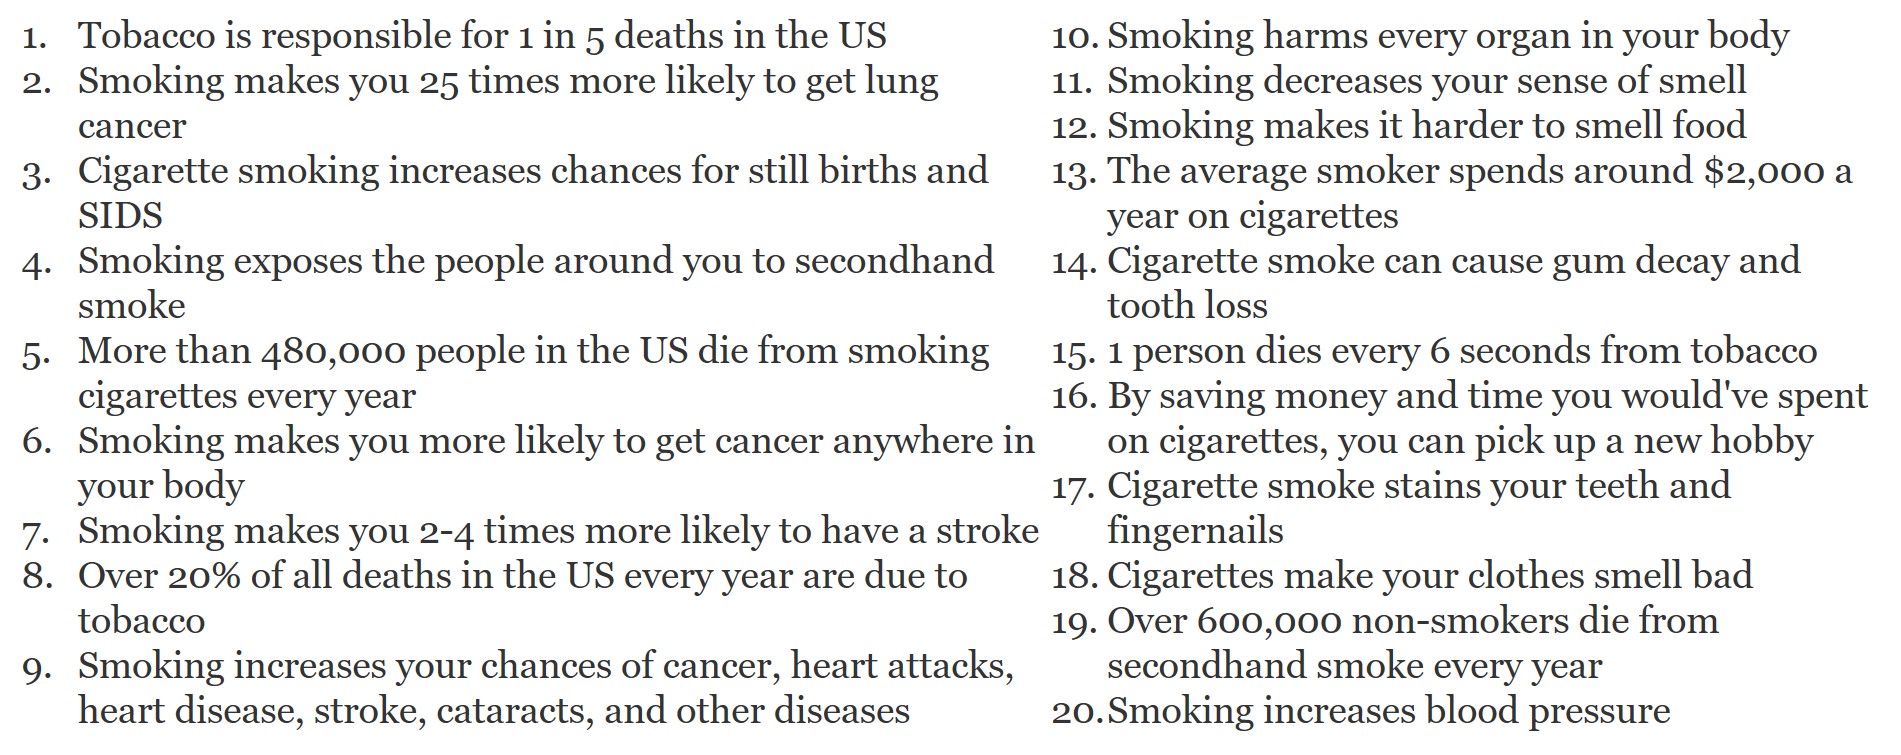 list of arguments against smoking